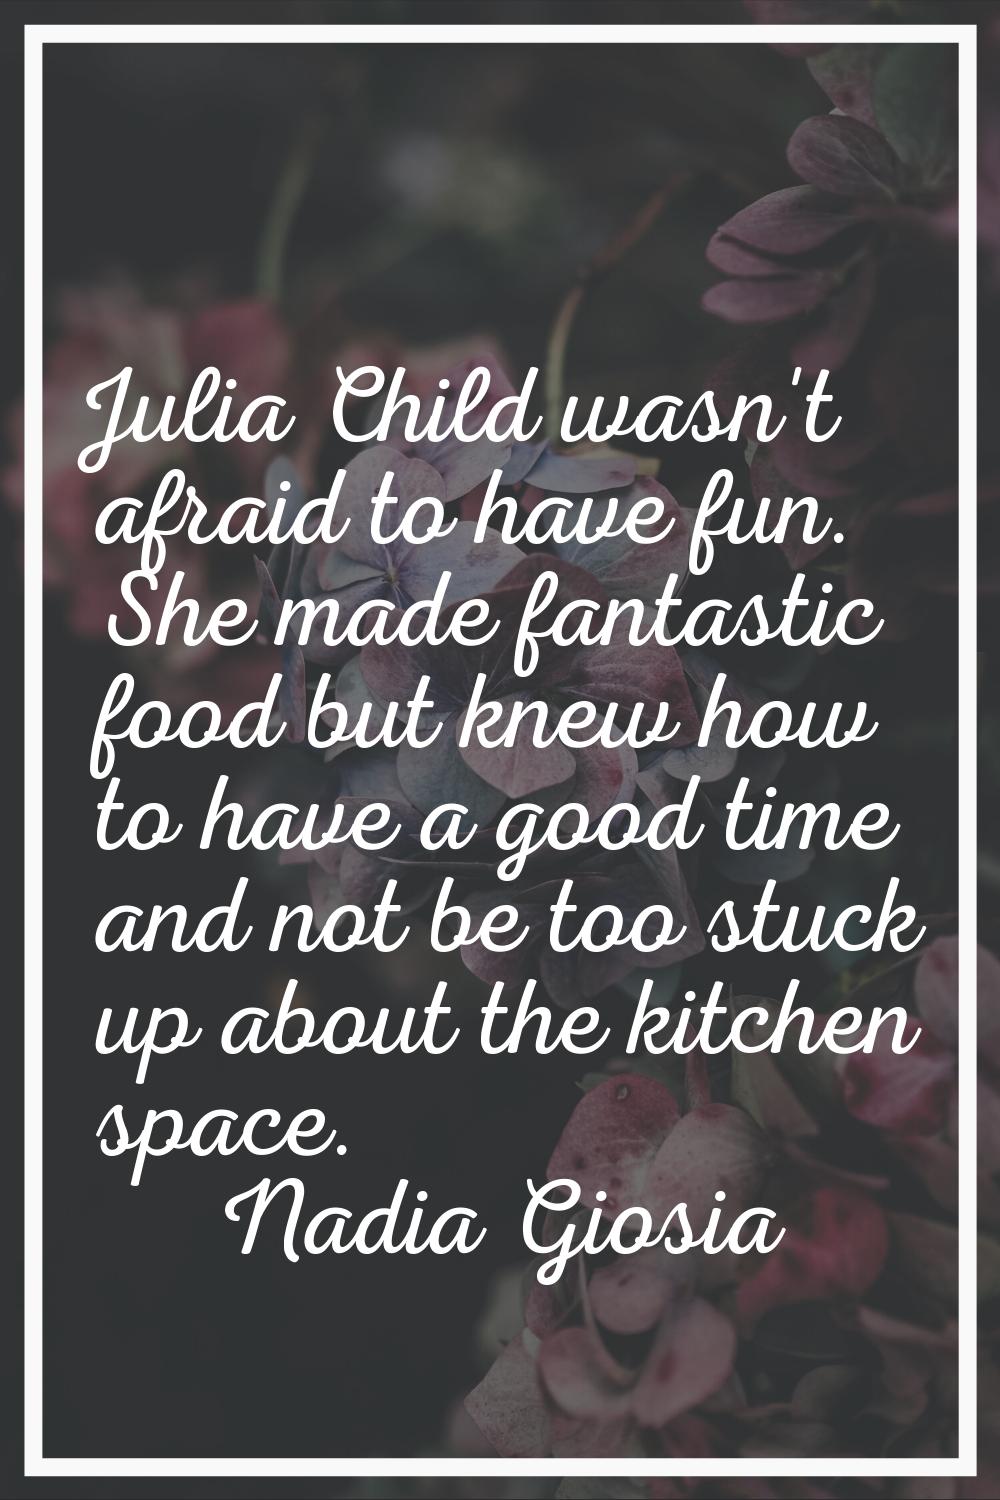 Julia Child wasn't afraid to have fun. She made fantastic food but knew how to have a good time and